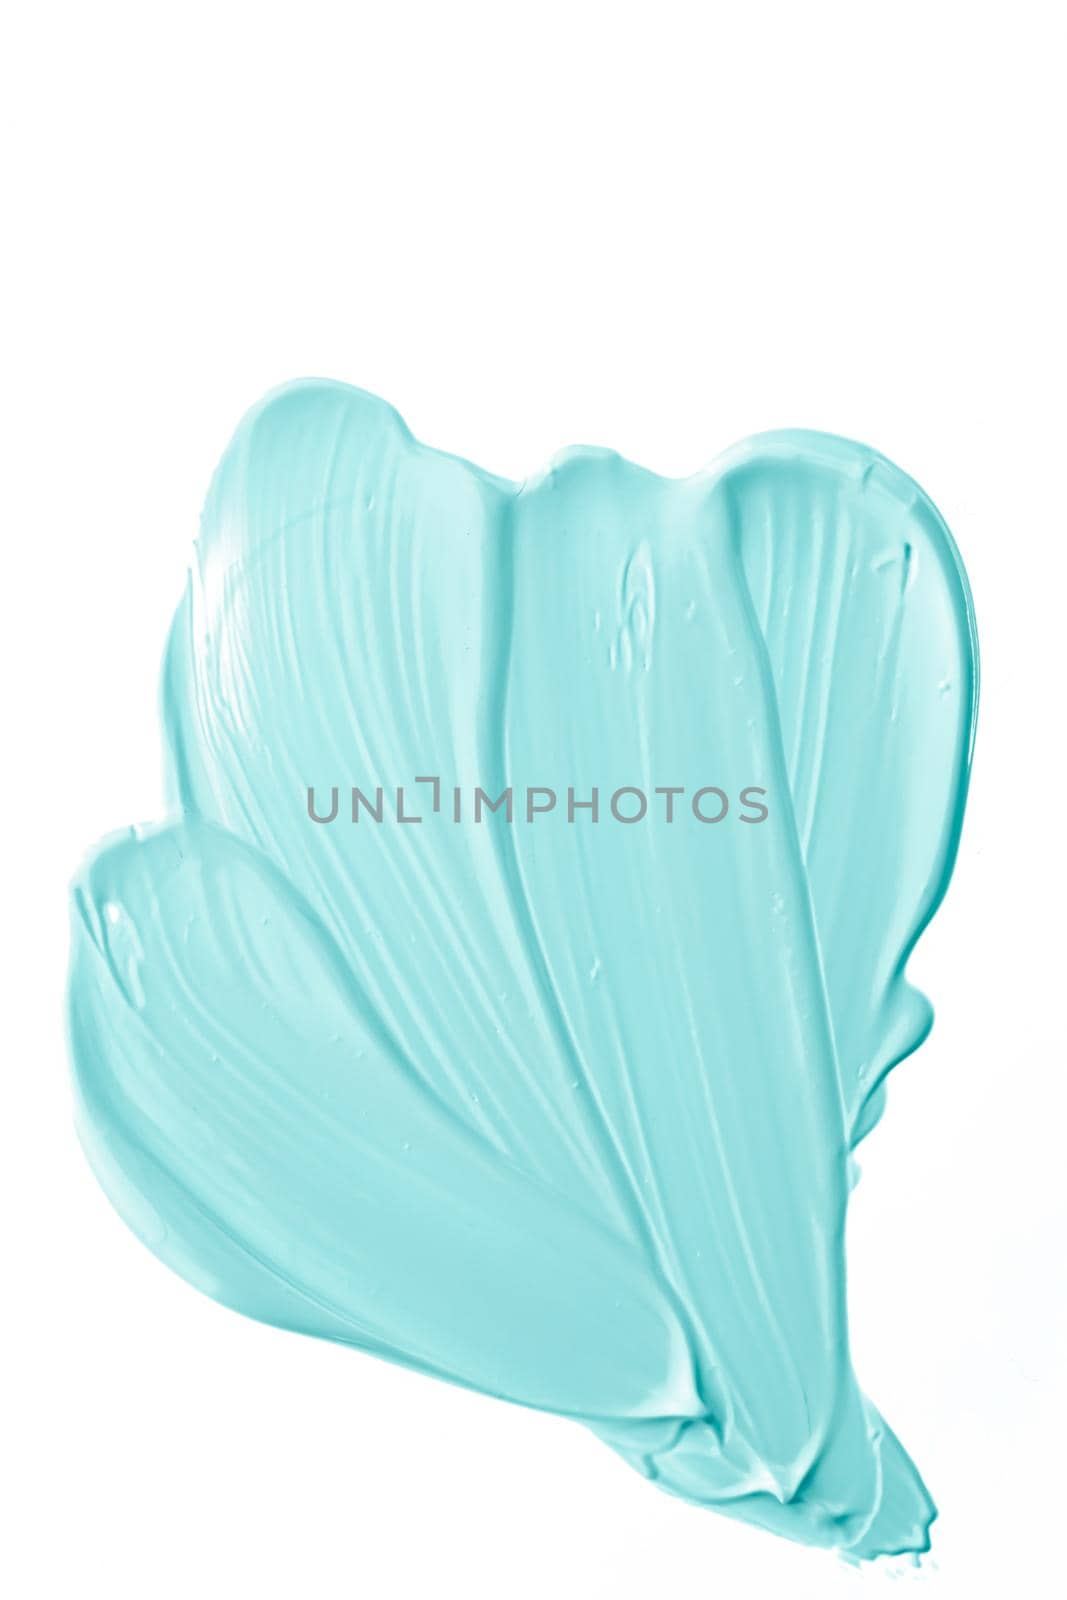 Pastel mint beauty swatch, skincare and makeup cosmetic product sample texture isolated on white background, make-up smudge, cream cosmetics smear or paint brush stroke by Anneleven